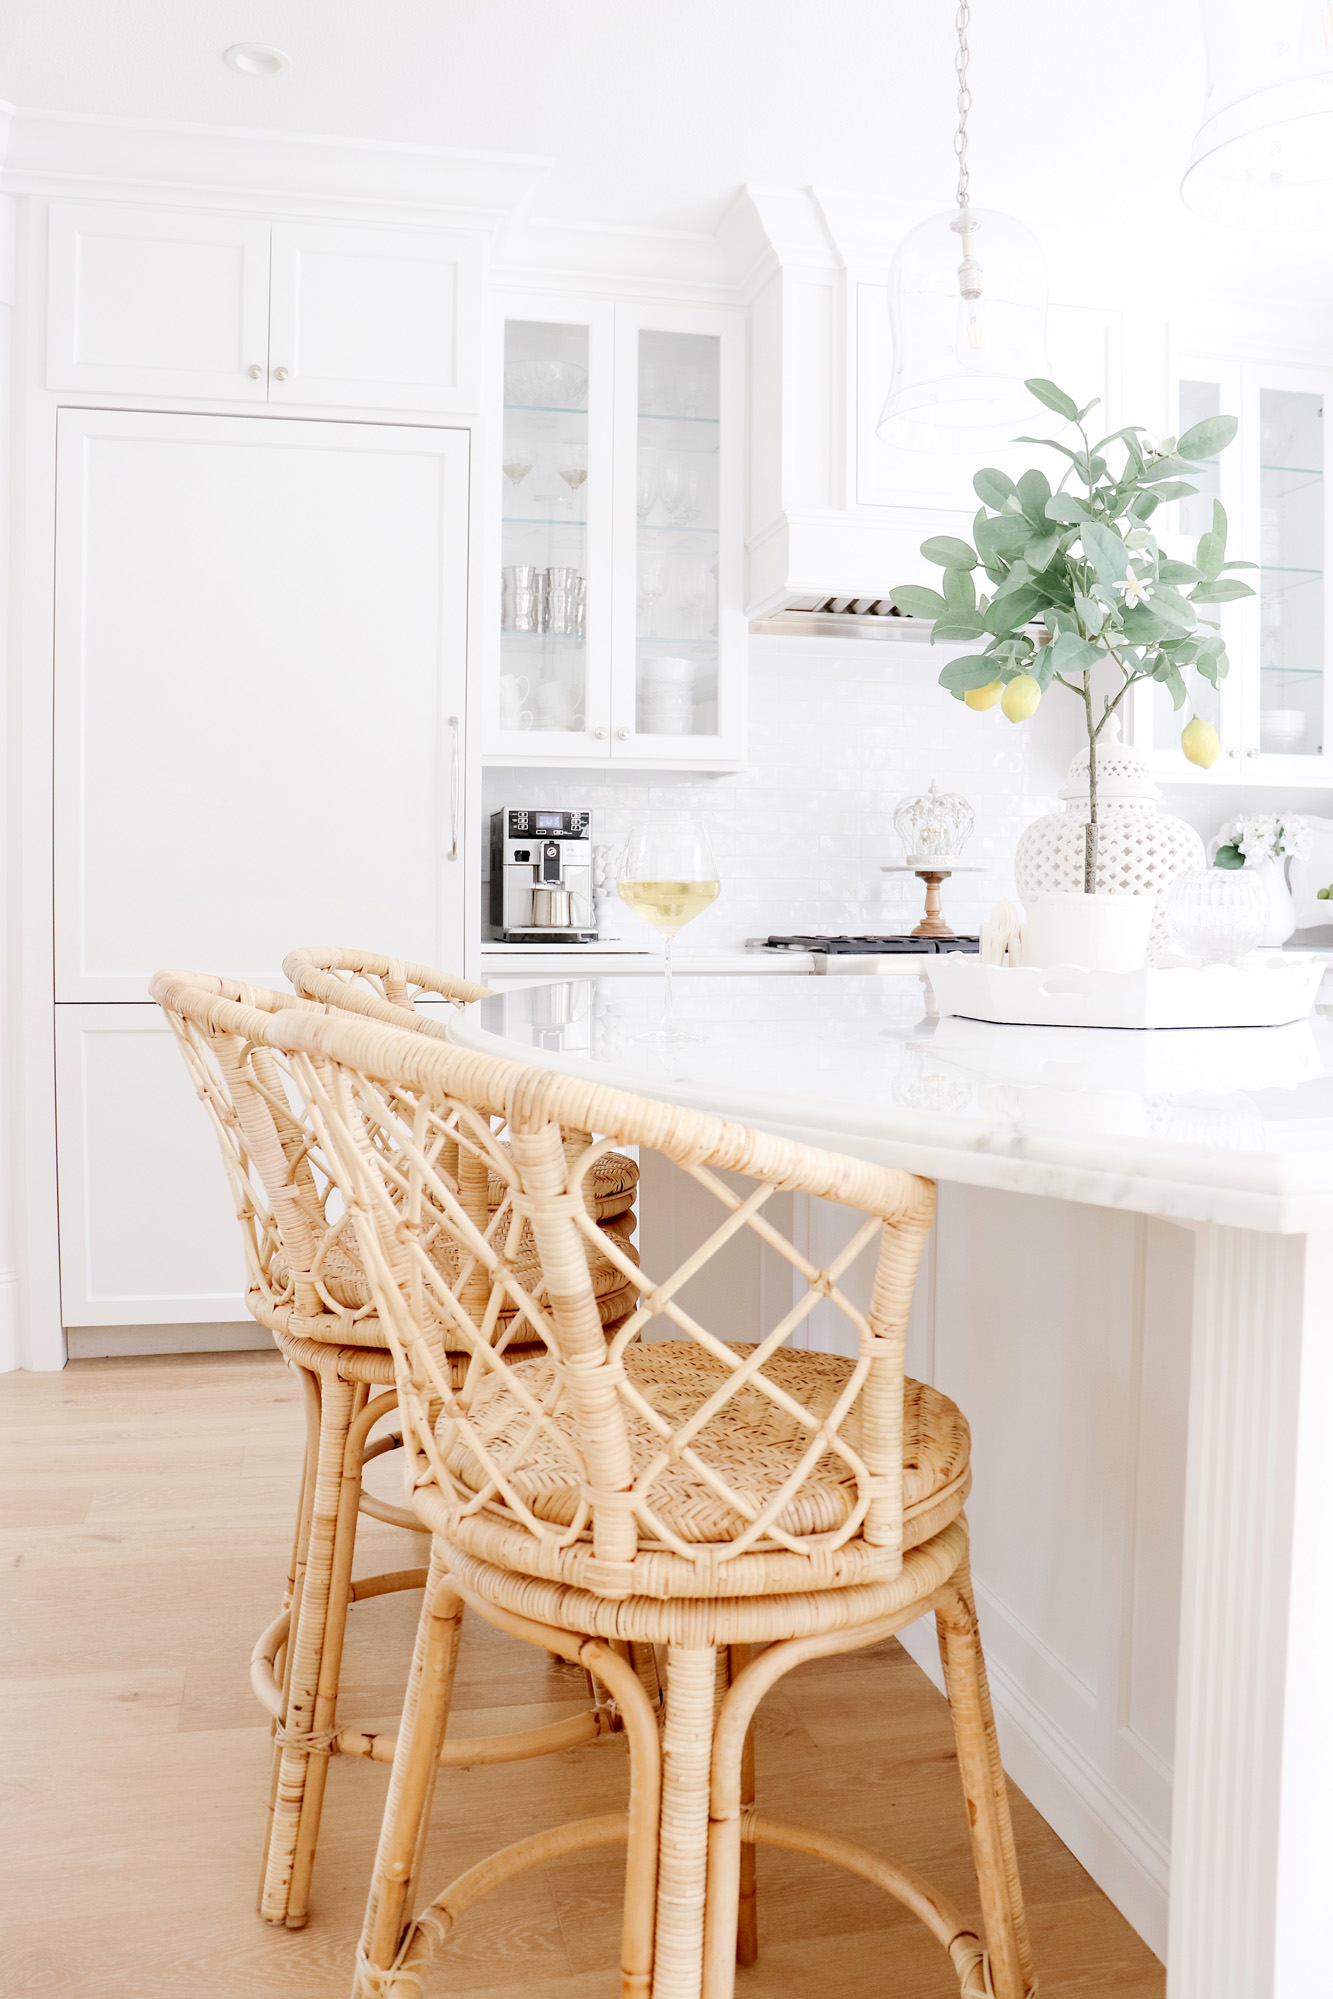 Bringing Texture to the Kitchen with Rattan Stools - Obsessed with my new woven stools! I sourced all of my favorite rattan and woven decor pieces too.  | Kristy Wicks